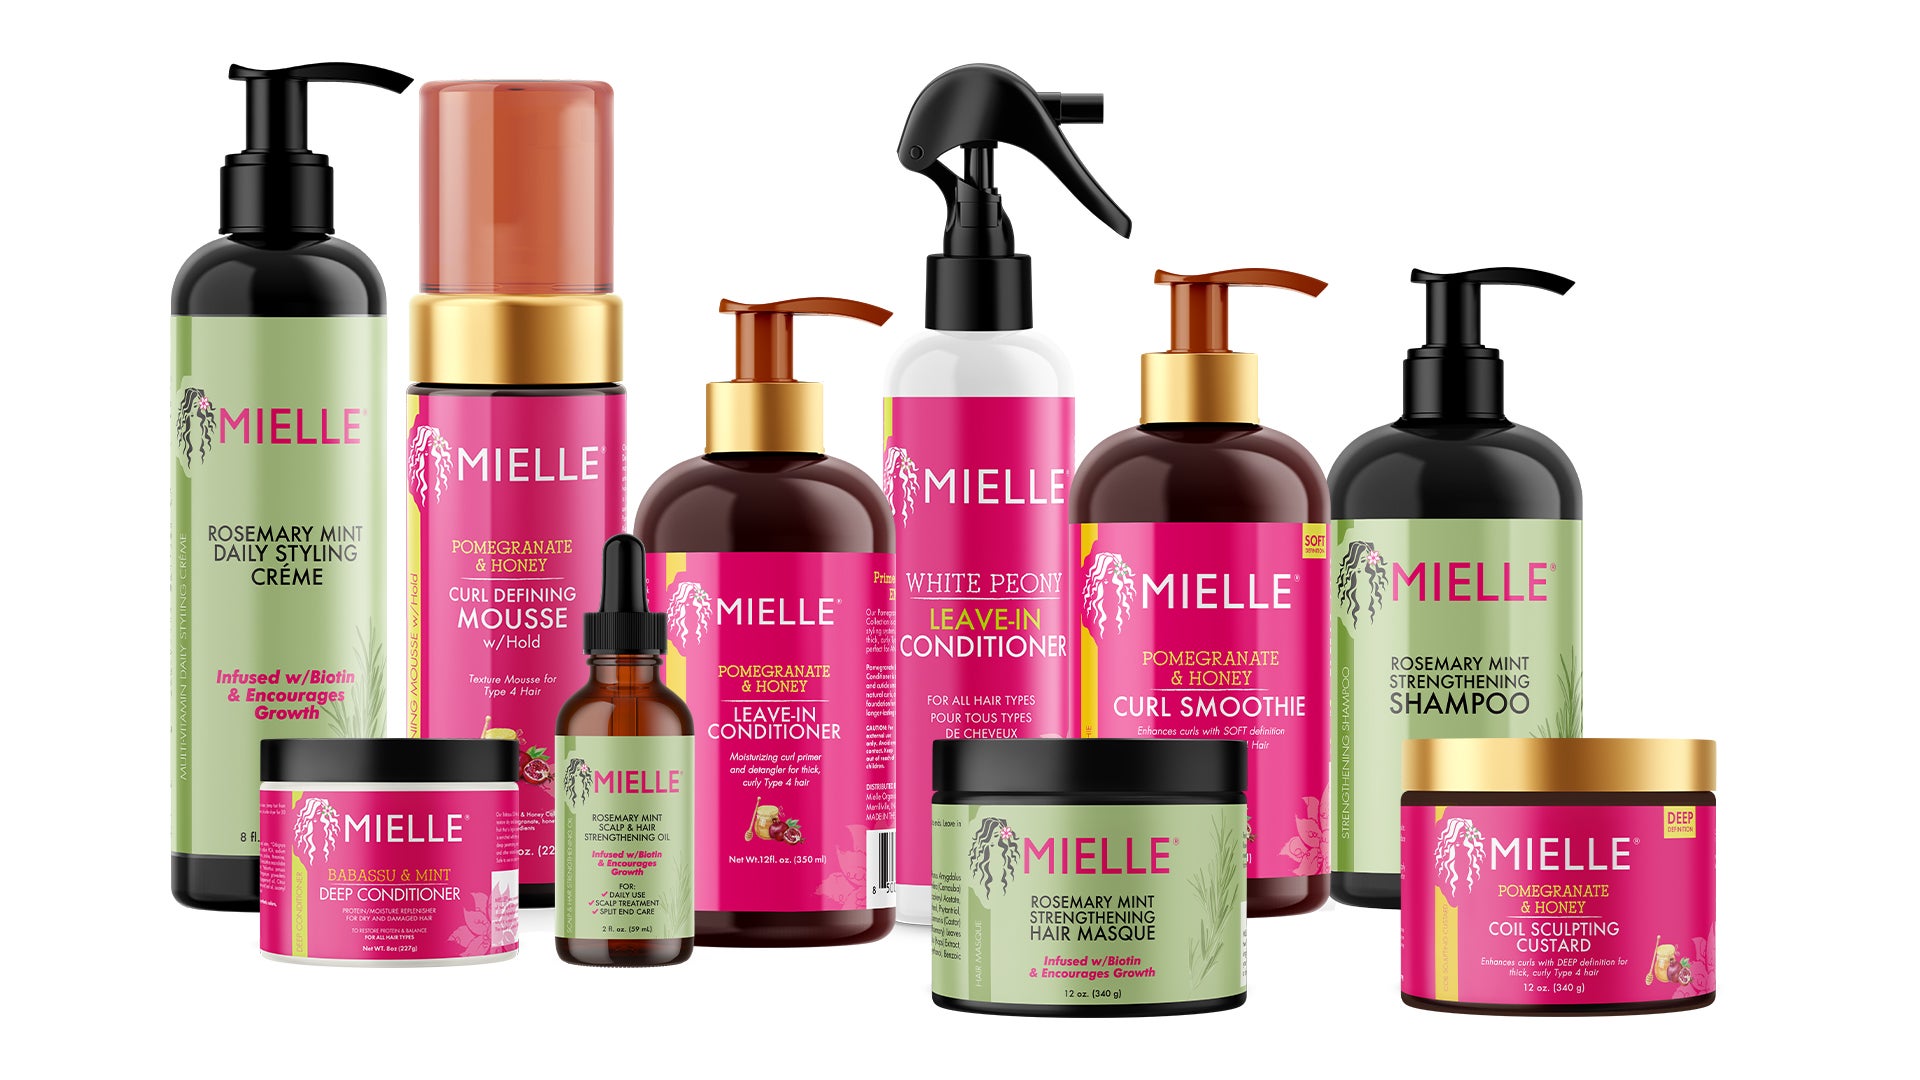 Mielle Organics And P&G Beauty Join Forces